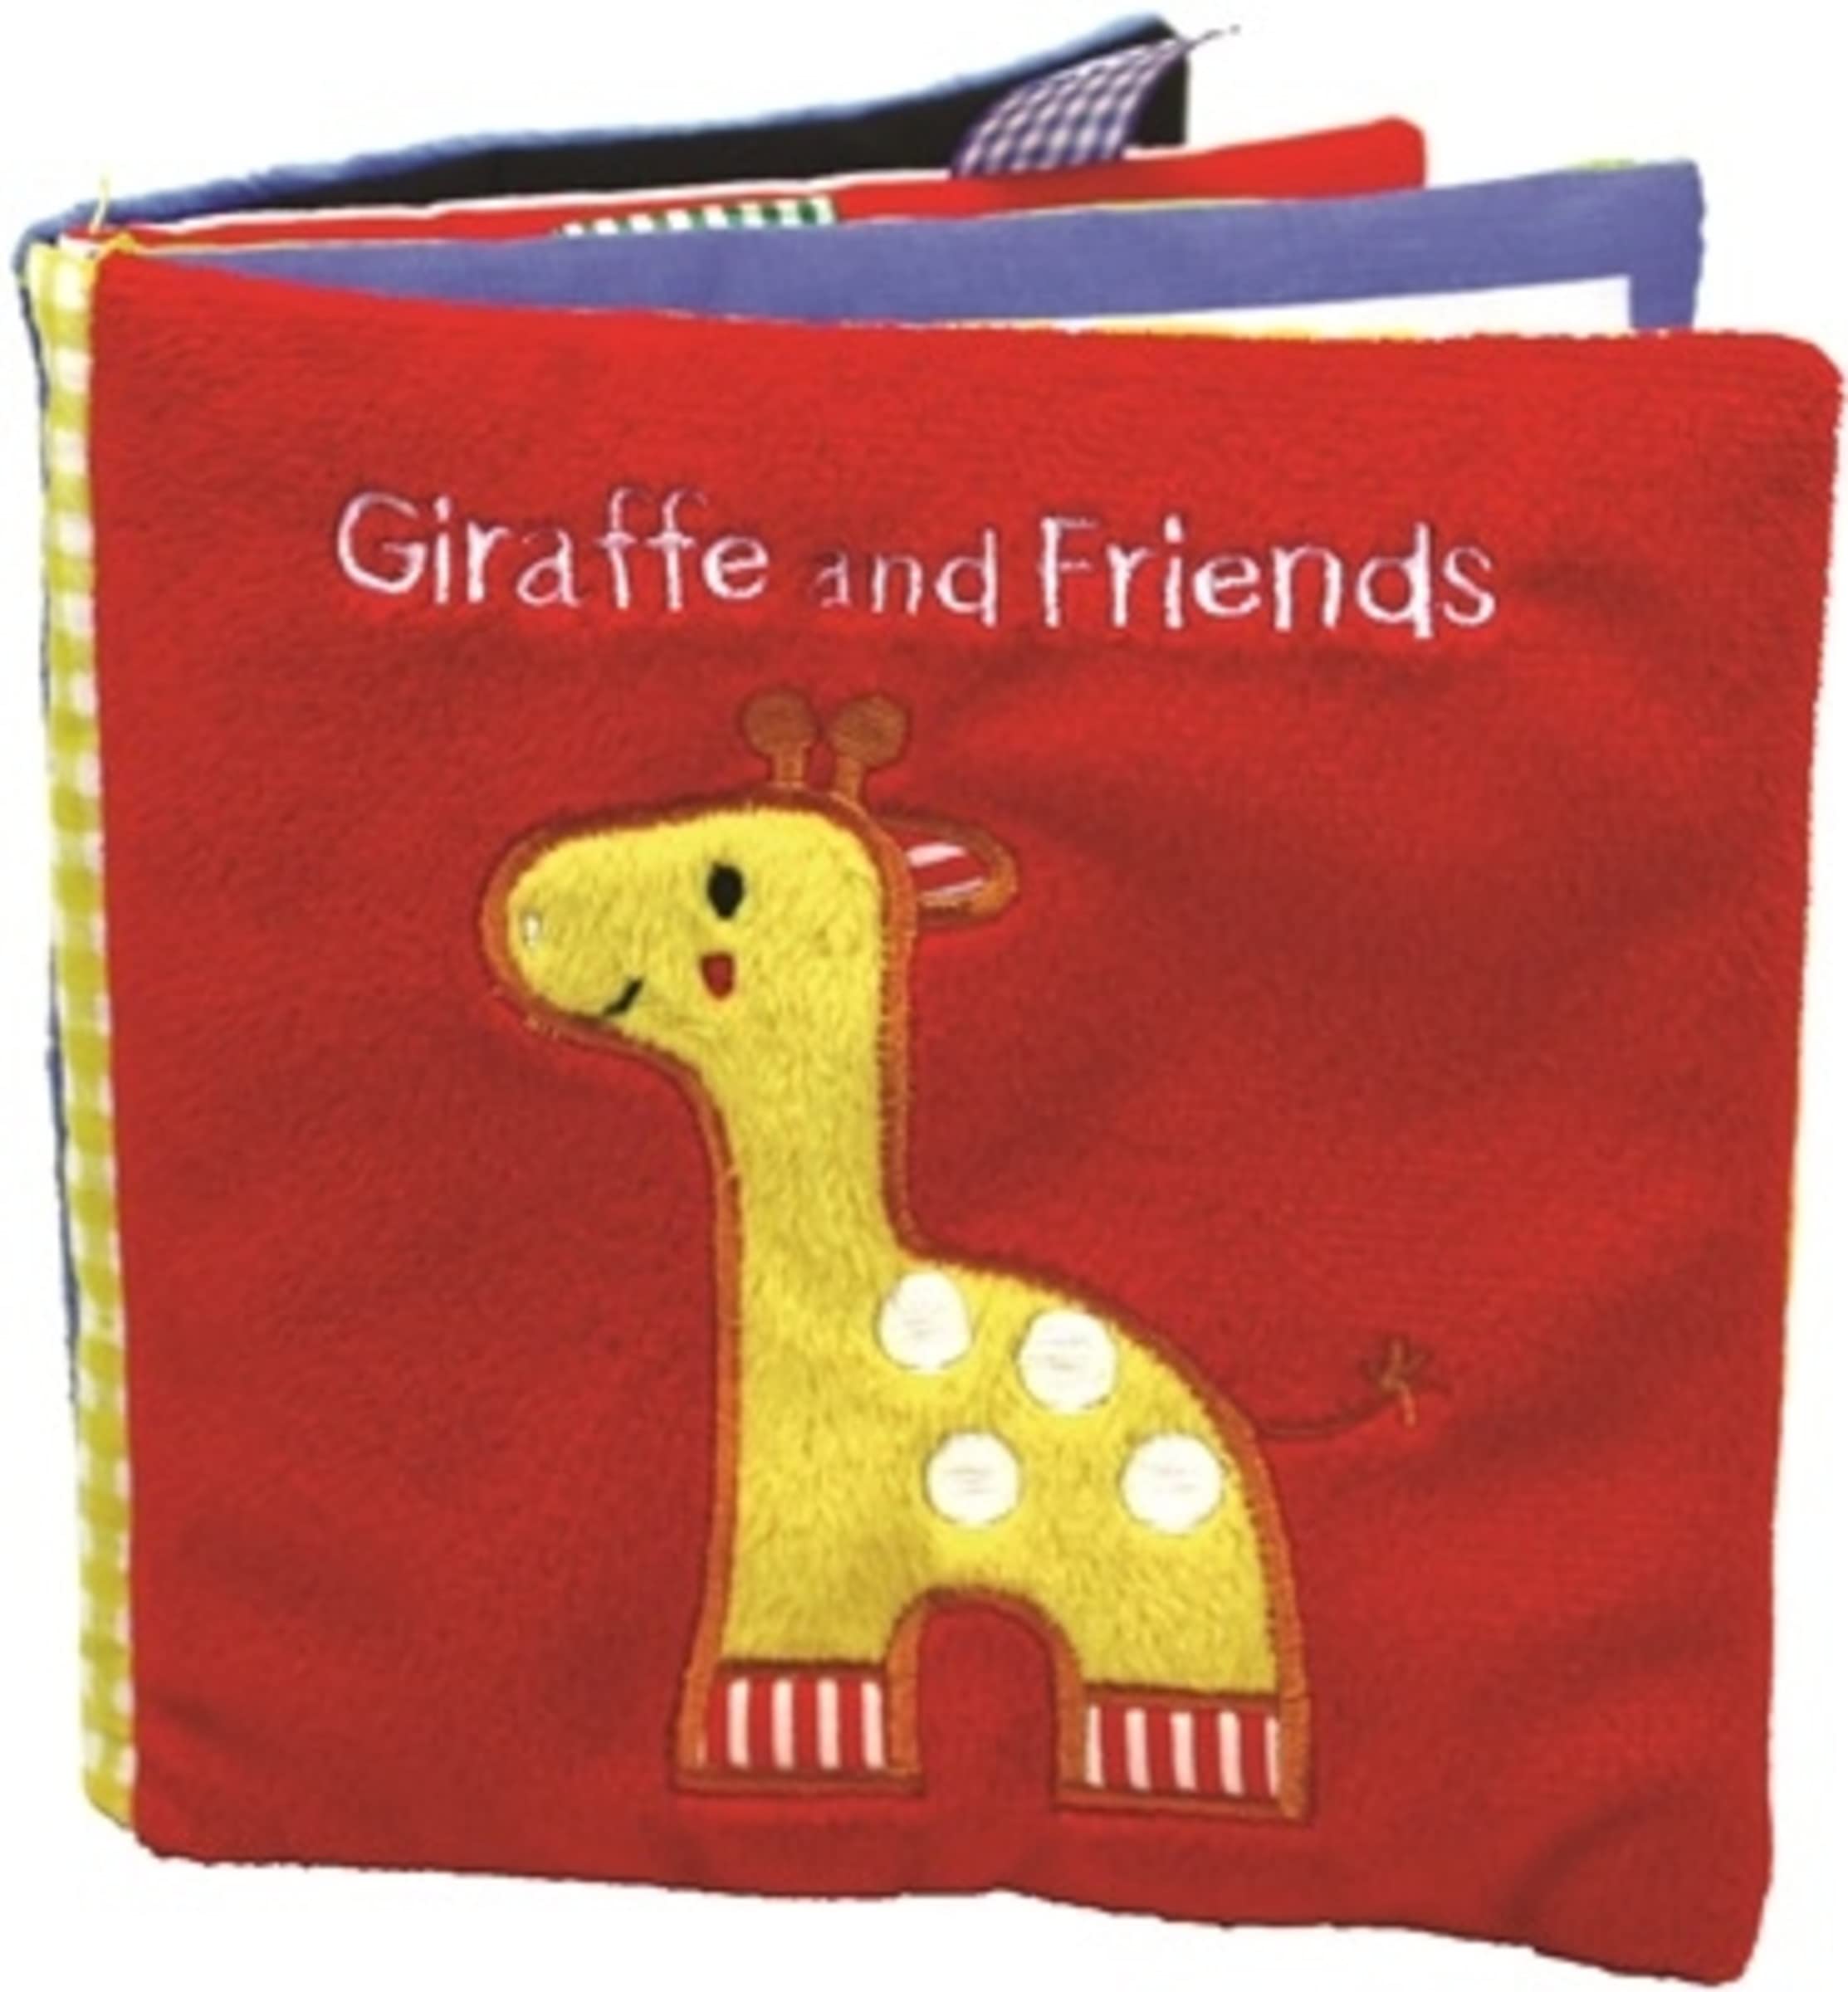 Giraffe and Friends: A Soft and Fuzzy Book for Baby (Friends Cloth Books)